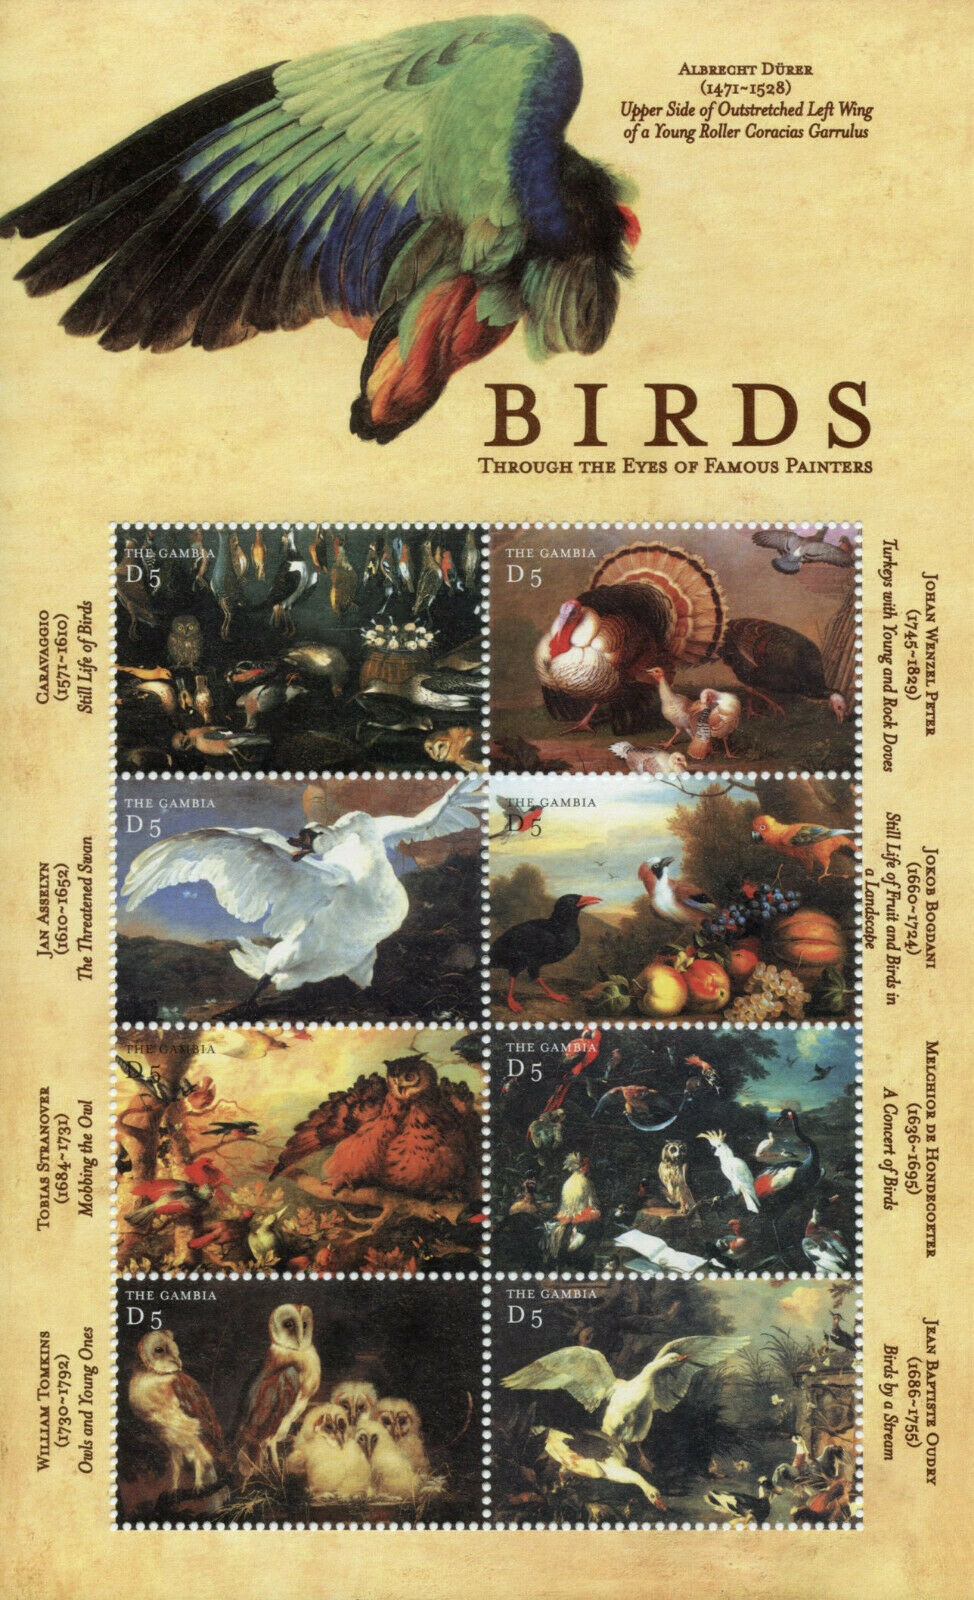 Gambia 2000 MNH Art Stamps Birds Through Eyes Famous Painters Caravaggio 8v M/S